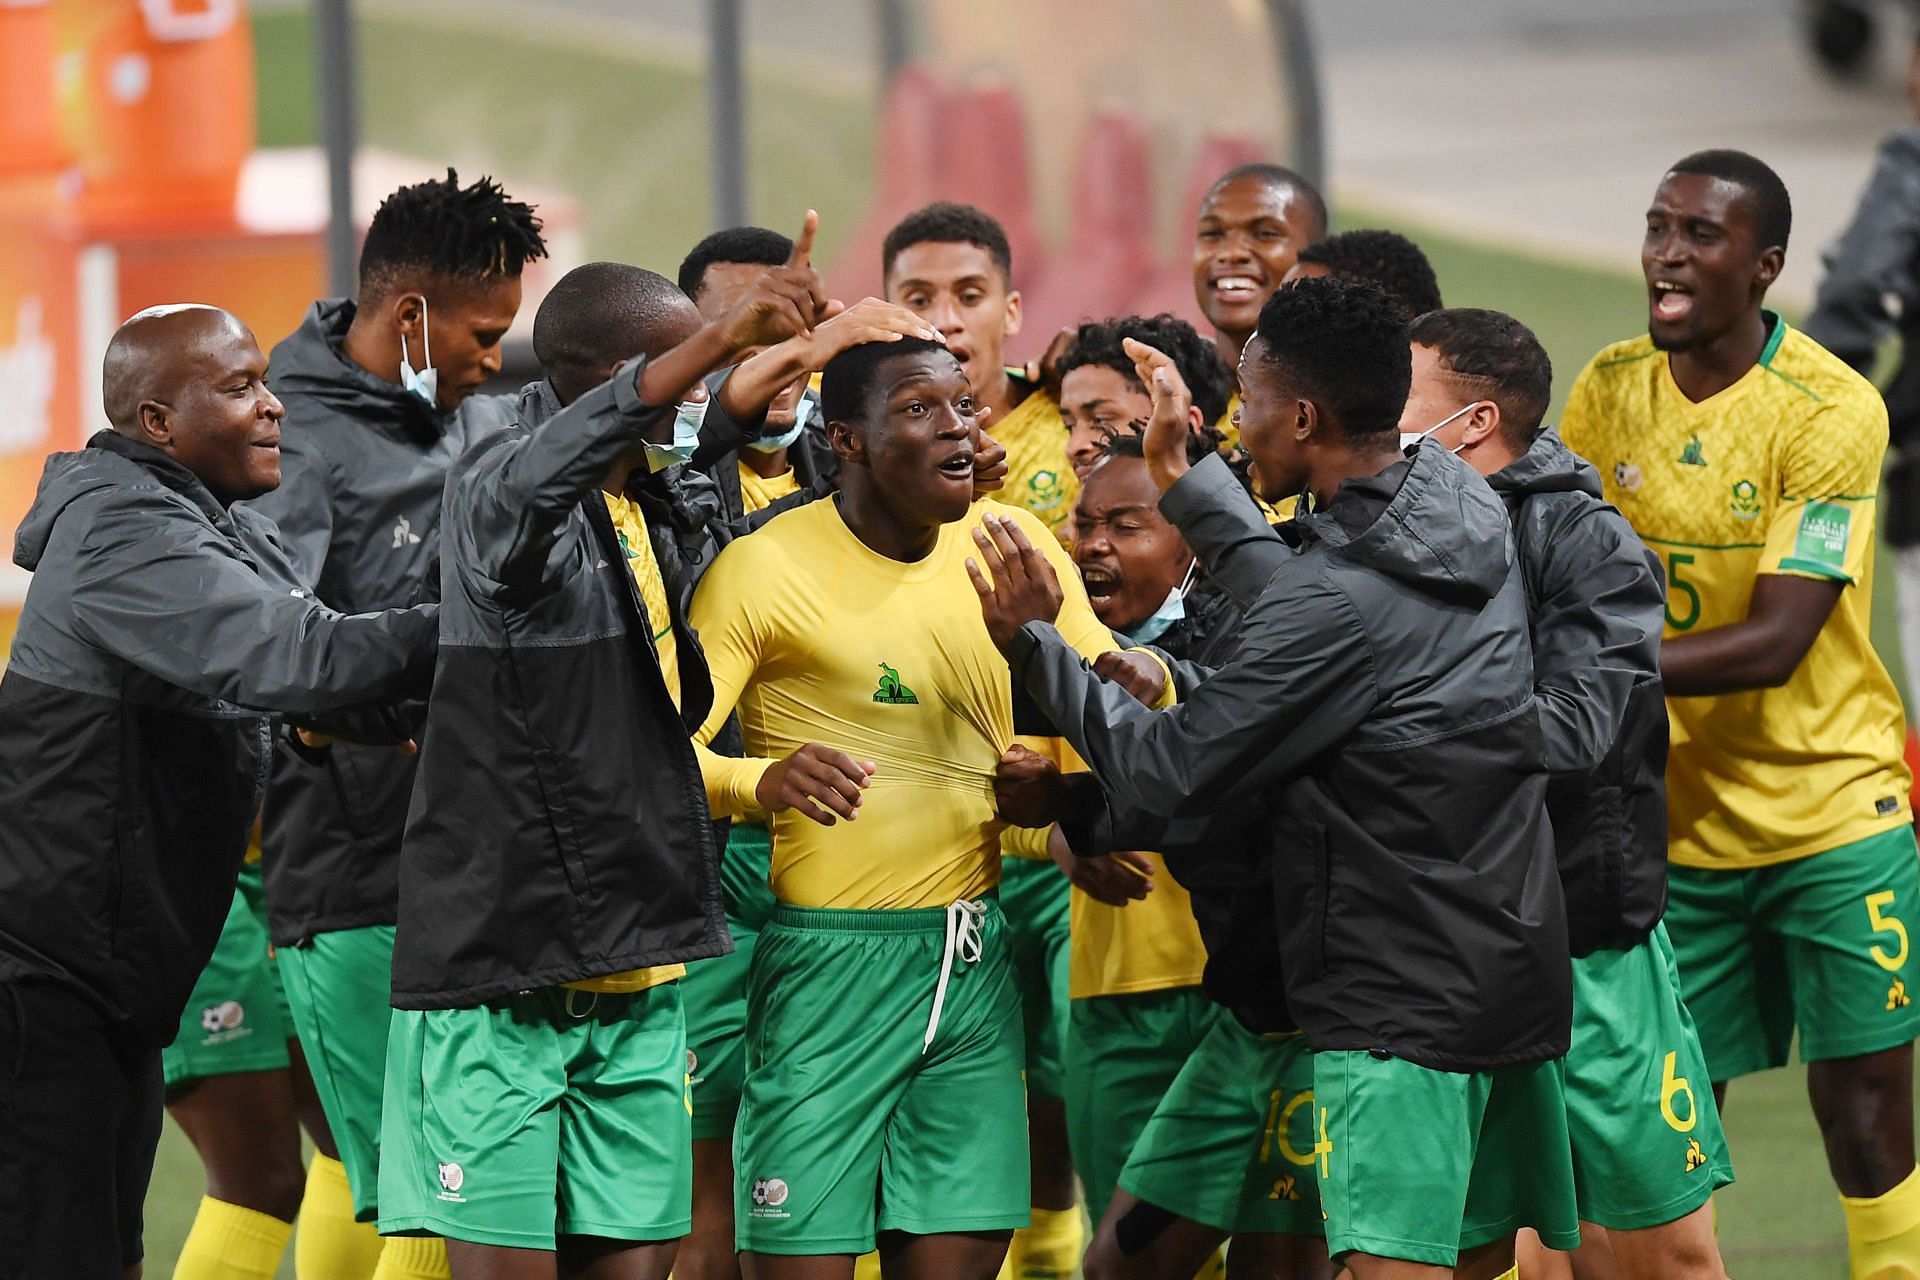 South Africa have neither lost nor ever conceded to Guinea before